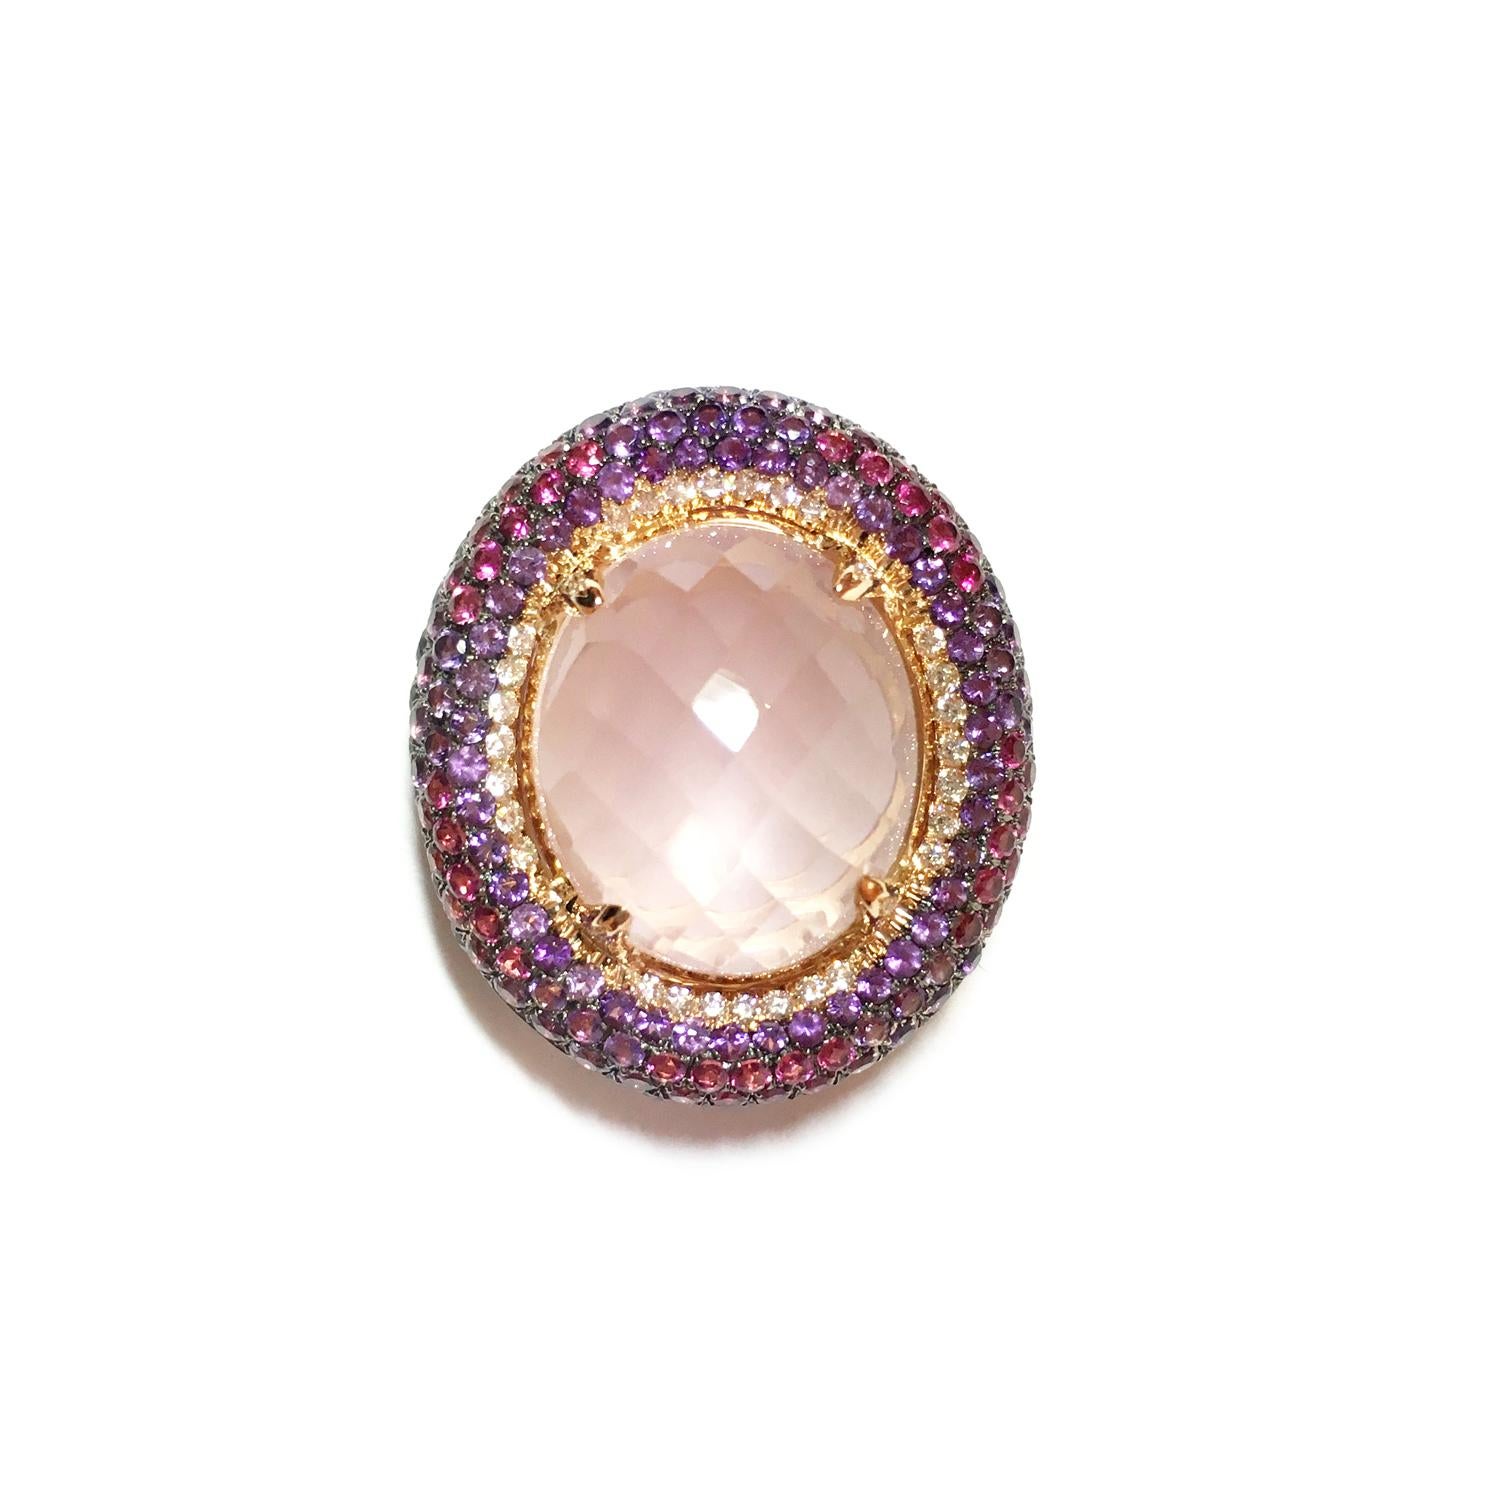 Reminiscent of the colourful Carnival of Venice, this feminine composition features a plunging pink quartz surrounded by mesmerising circles of rubellite, amethyst and brilliant cut diamonds.

Rolo 18 Karat gold Chain (45cm long)